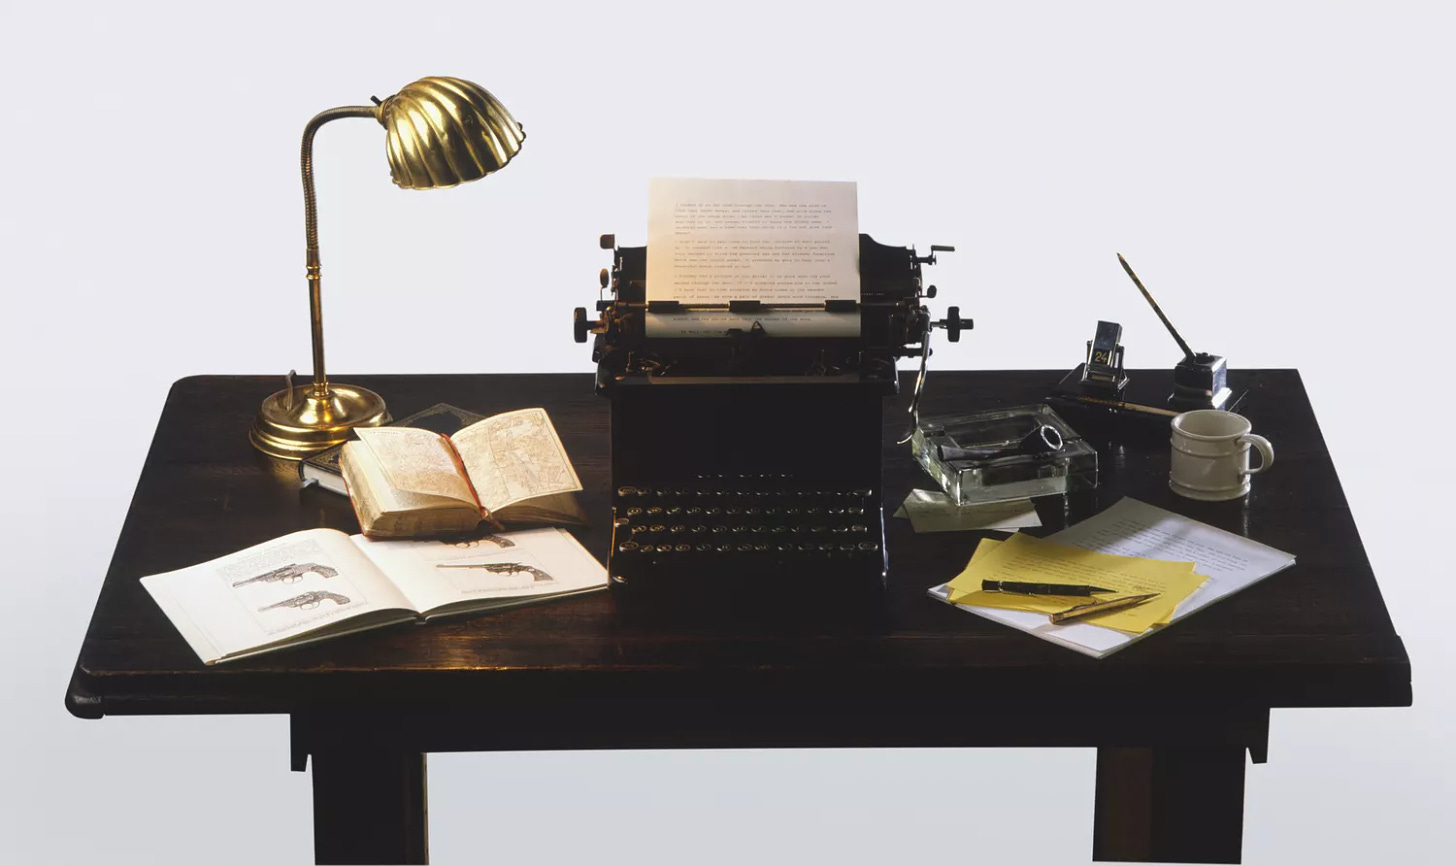 Golden desk lamp, open books, old-fashioned typewriter and writer's equipment on wooden desk, high angle view.